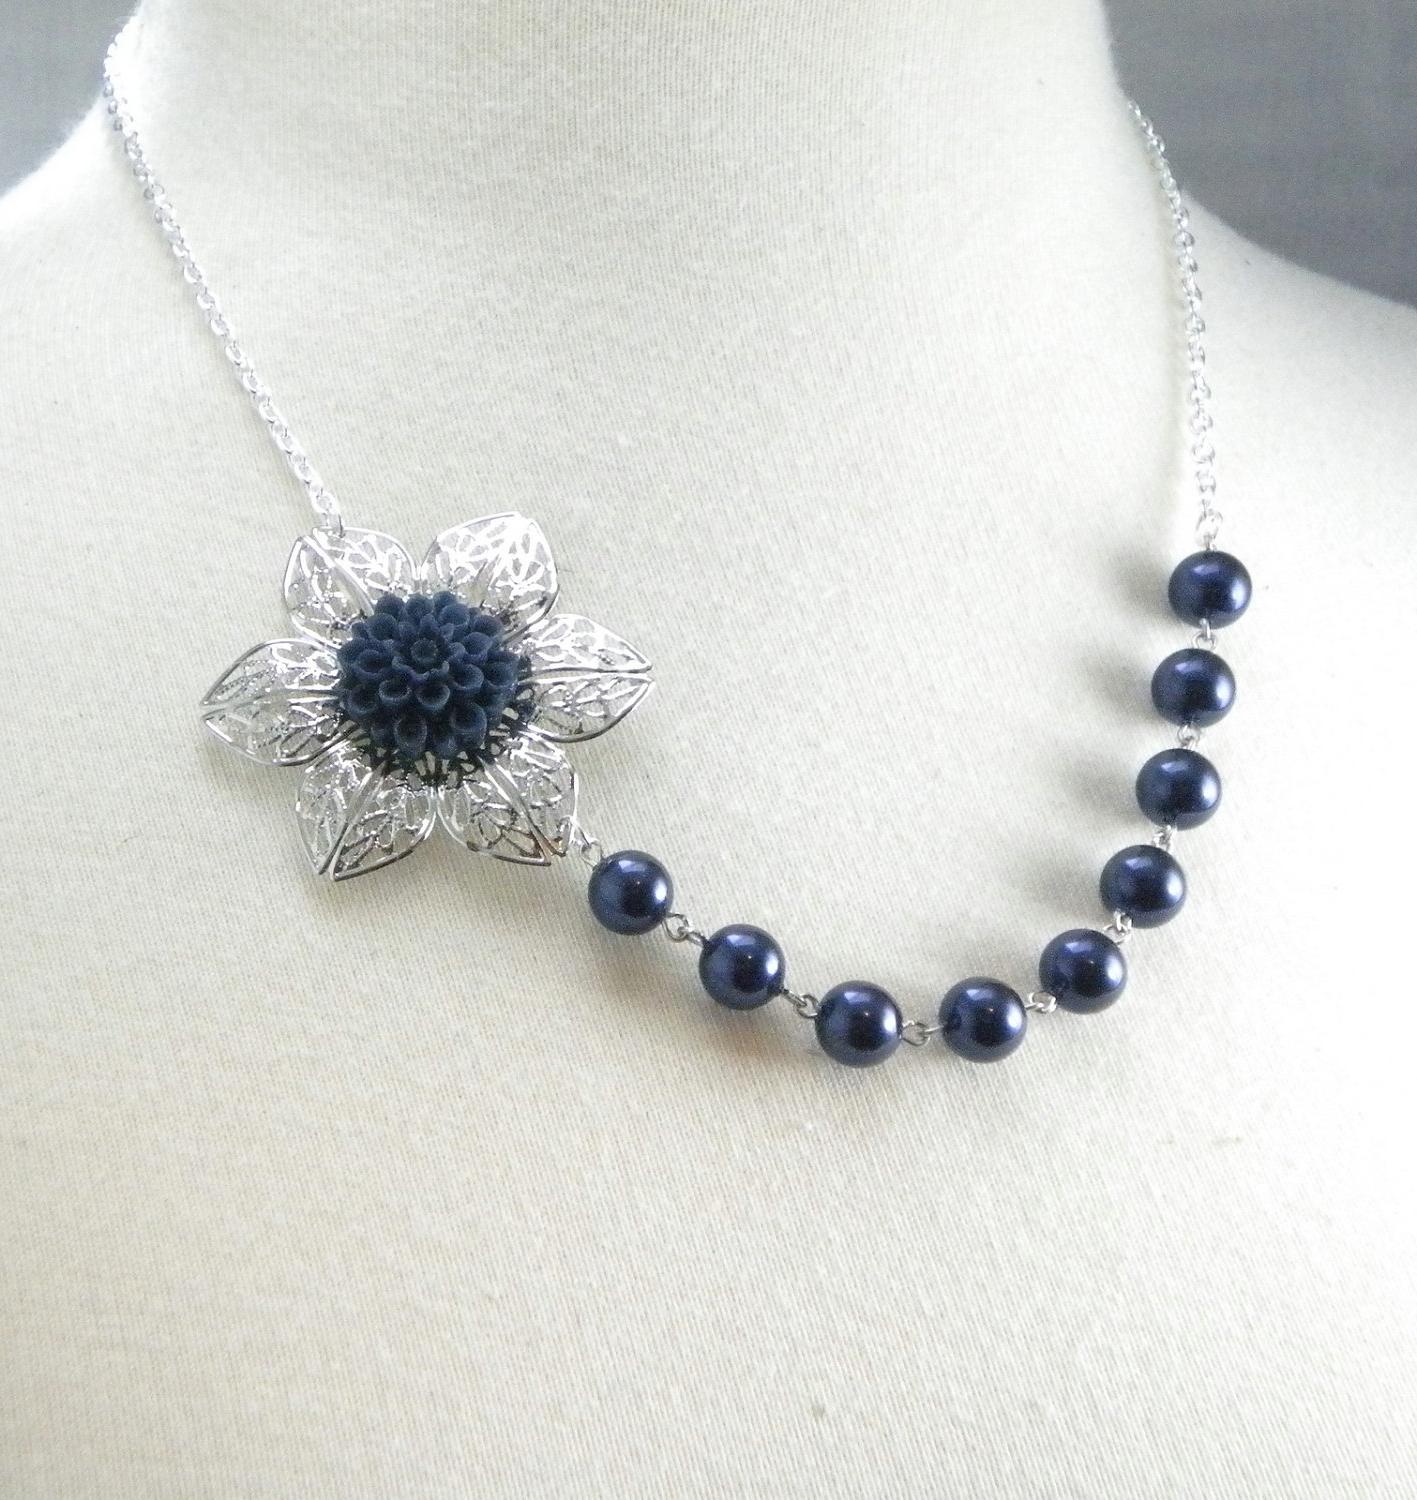 Navy Blue and Silver Wedding Flower Necklace. From cymbaline84